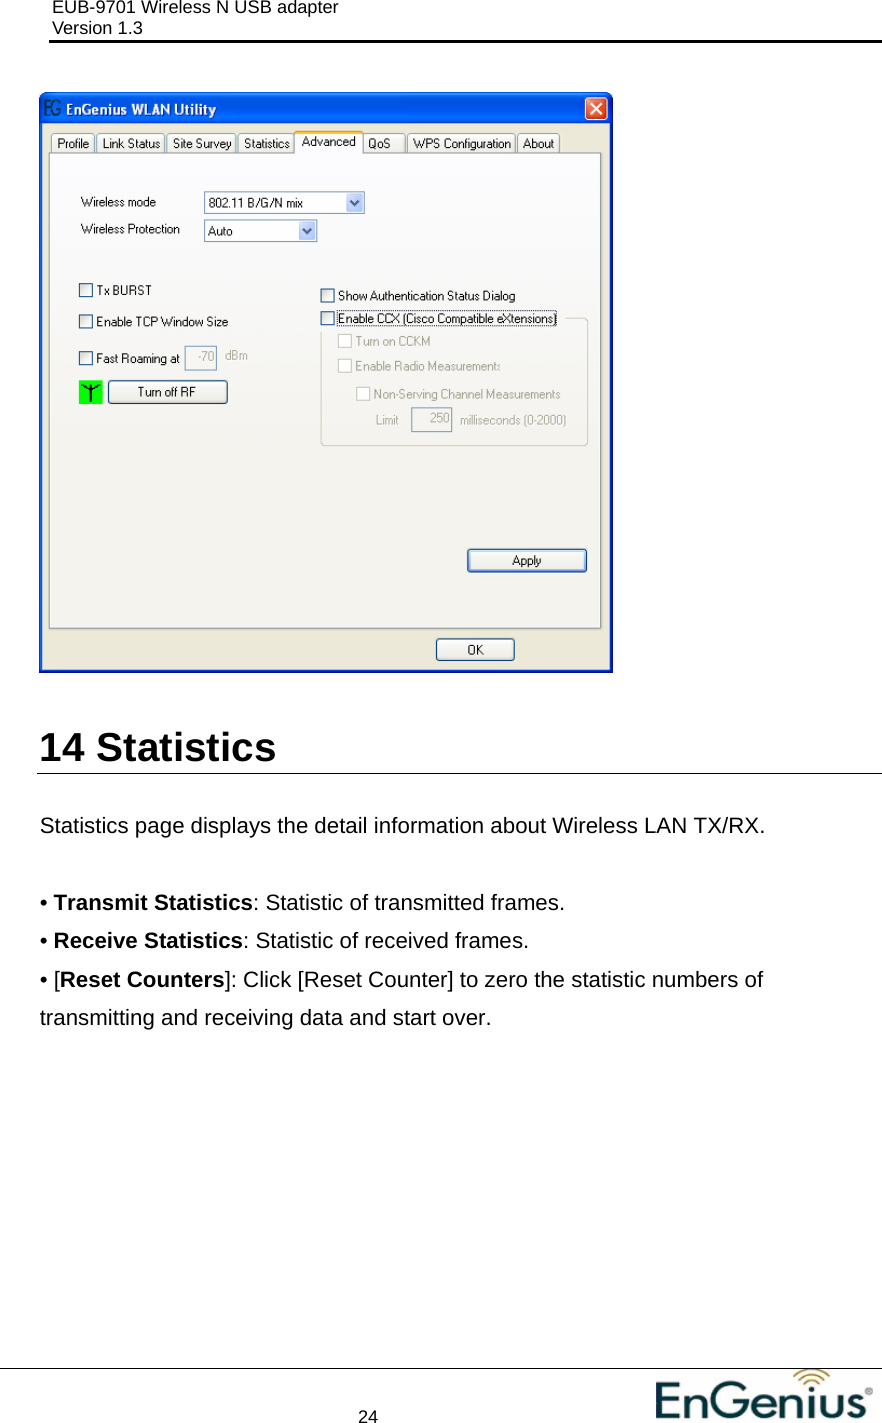 EUB-9701 Wireless N USB adapter                                     Version 1.3    24                                                            14  Statistics  Statistics page displays the detail information about Wireless LAN TX/RX.  • Transmit Statistics: Statistic of transmitted frames. • Receive Statistics: Statistic of received frames. • [Reset Counters]: Click [Reset Counter] to zero the statistic numbers of transmitting and receiving data and start over.  